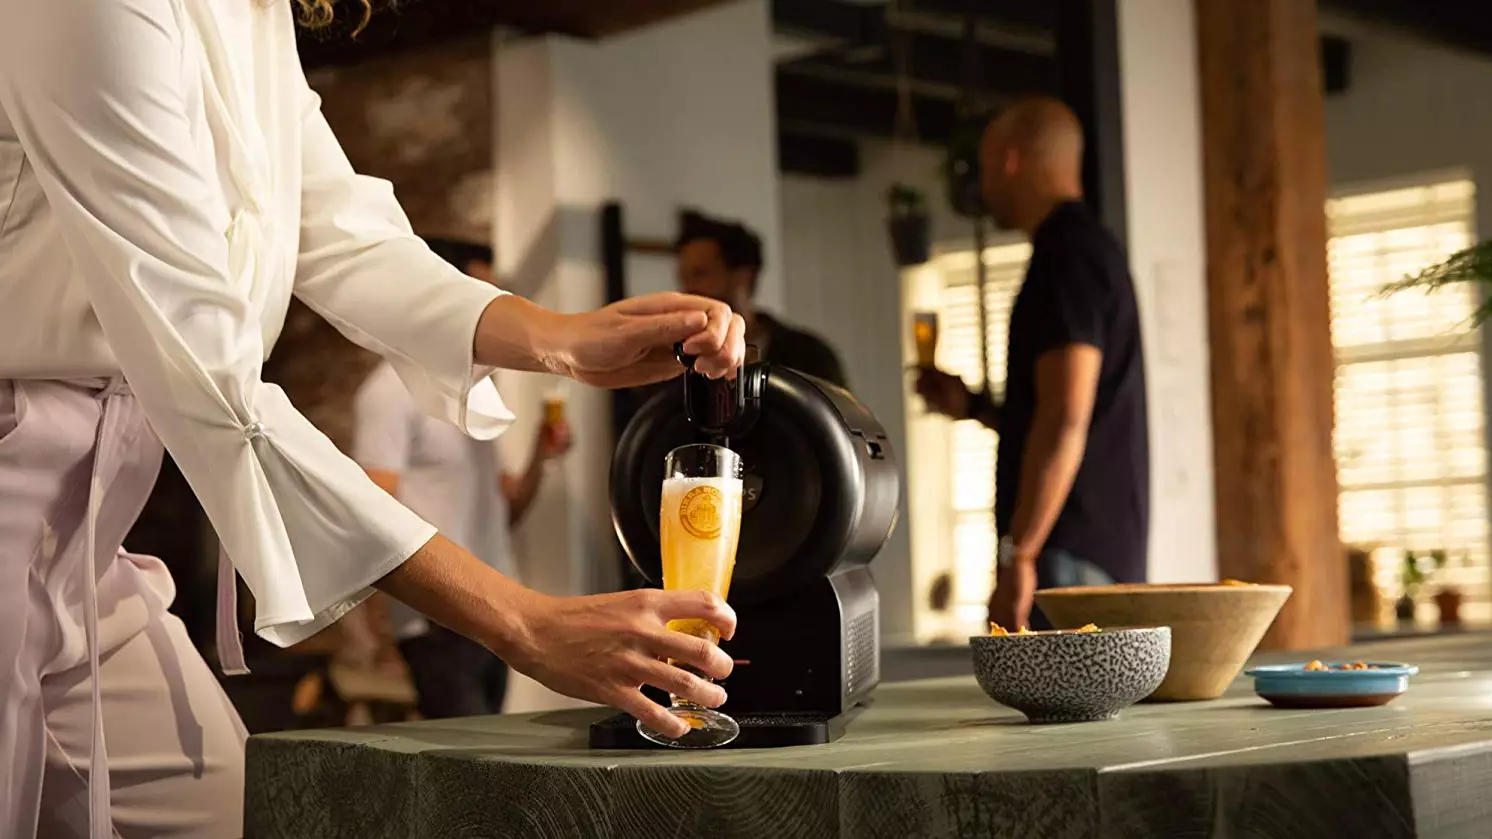 You Can Buy A Mini Beer Keg For Your Kitchen On Amazon